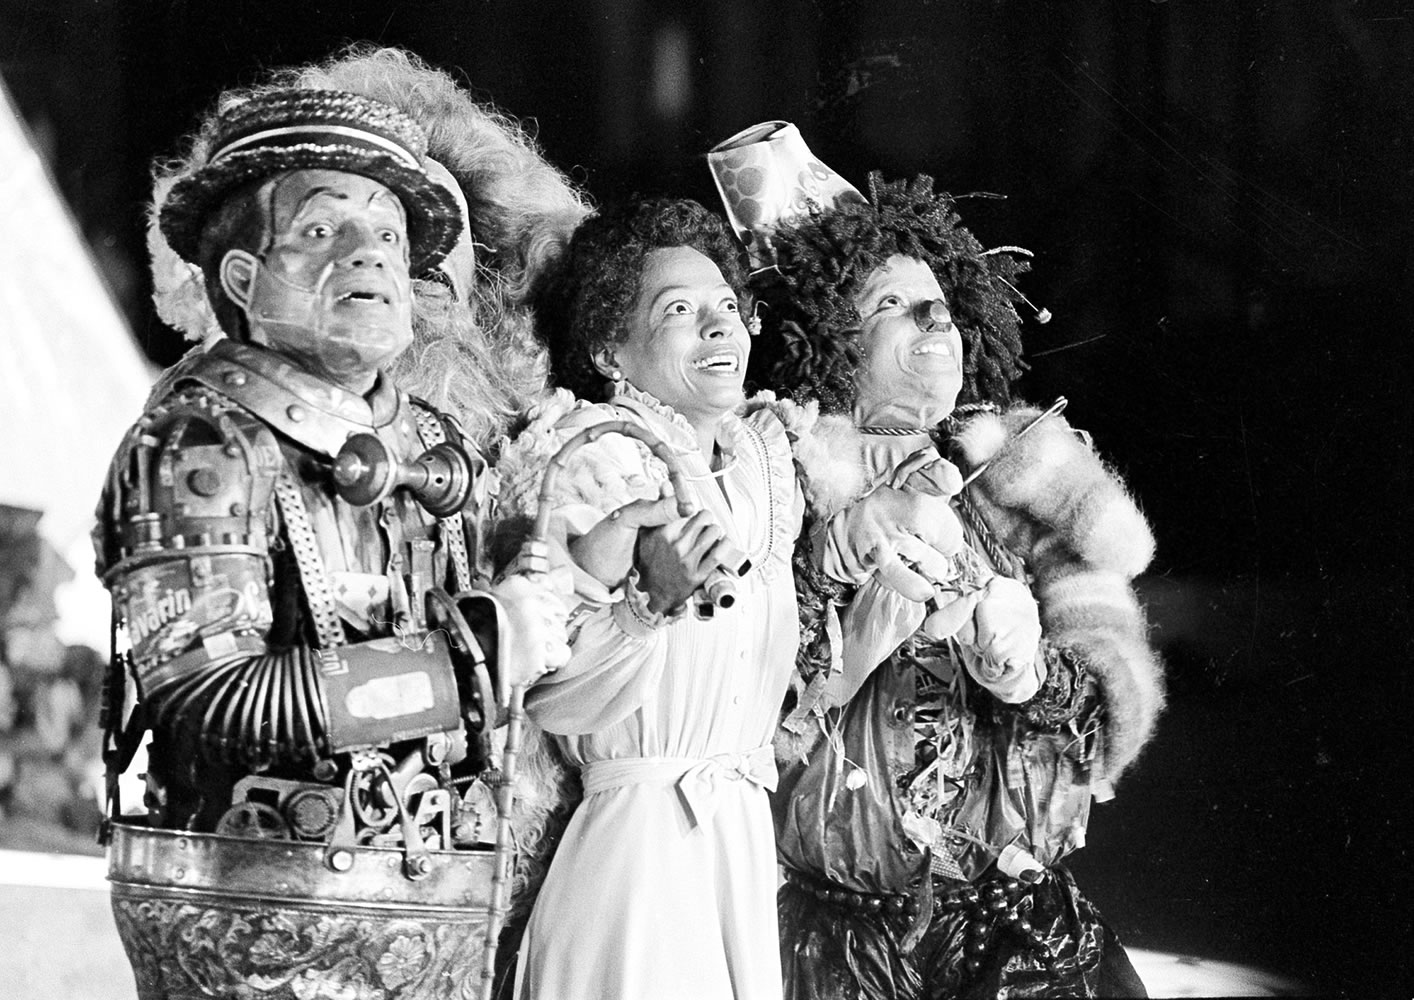 FILE - In this Oct. 4, 1977 file photo, Diana Ross, center, as Dorothy, Michael Jackson, right, as Scarecrow, and Nipsey Russell as Tinman, perform during filming of the musical &quot;The Wiz&quot; in New York's World Trade Center. Ted Ross, portraying the Lion, is partly hidden behind Russell. NBC will air a Dec. 3, 2015 live production of the 1970s stage reinvention of &quot;The Wizard of Oz,&quot; and Cirque du Soleil's new stage theatrical division will present &quot;The Wiz&quot; on Broadway for the 2016-17 season.